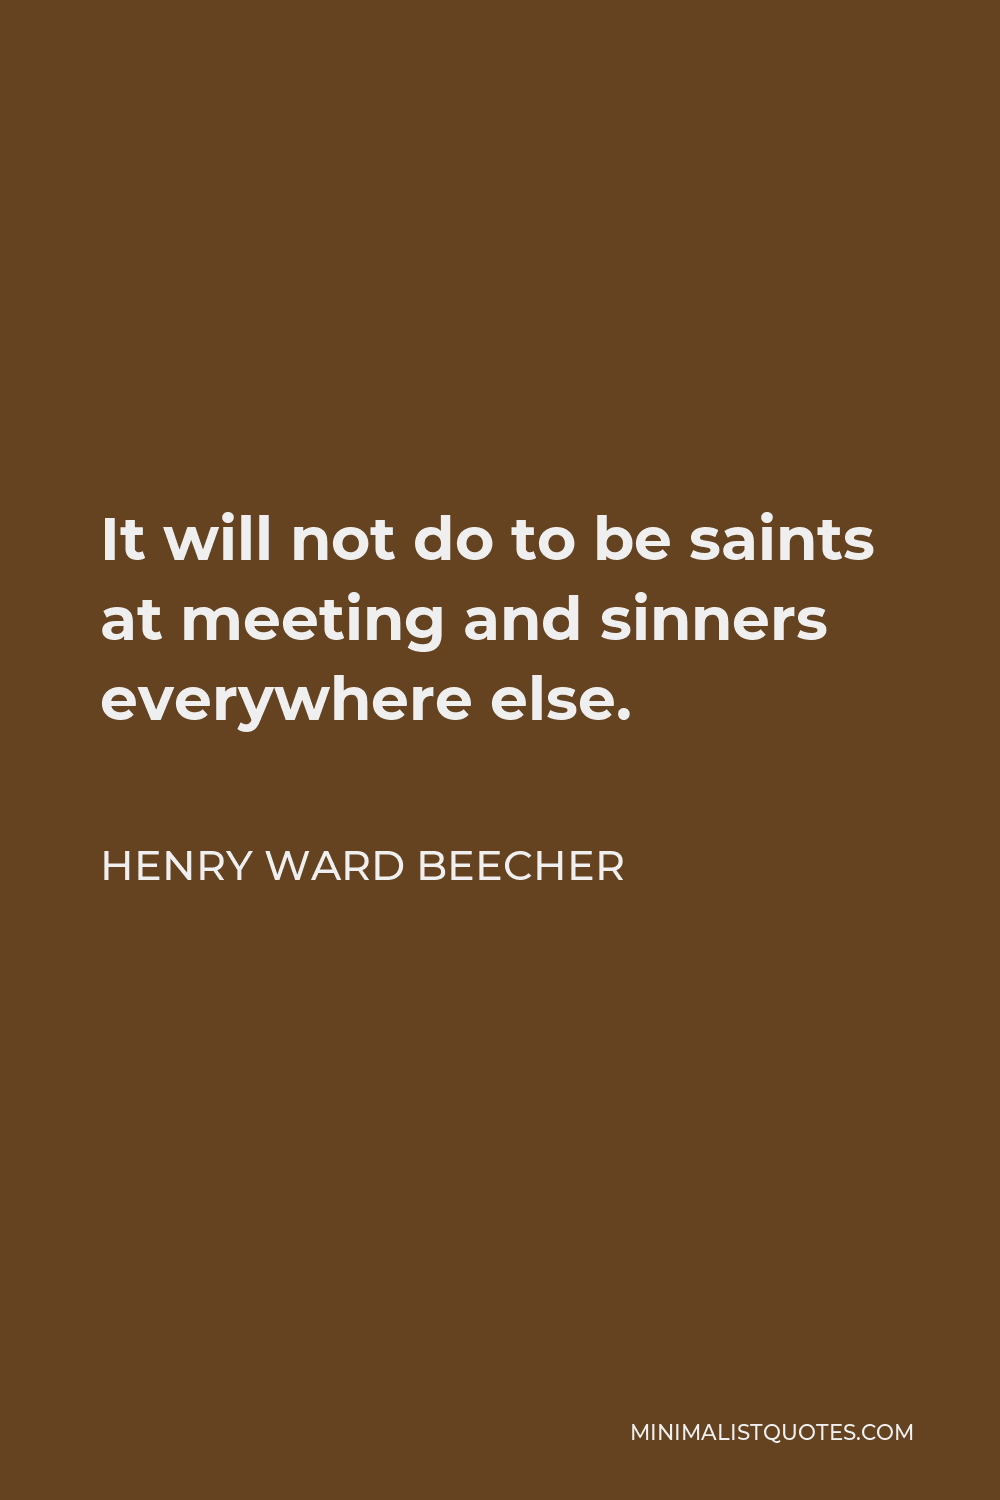 Henry Ward Beecher Quote - It will not do to be saints at meeting and sinners everywhere else.